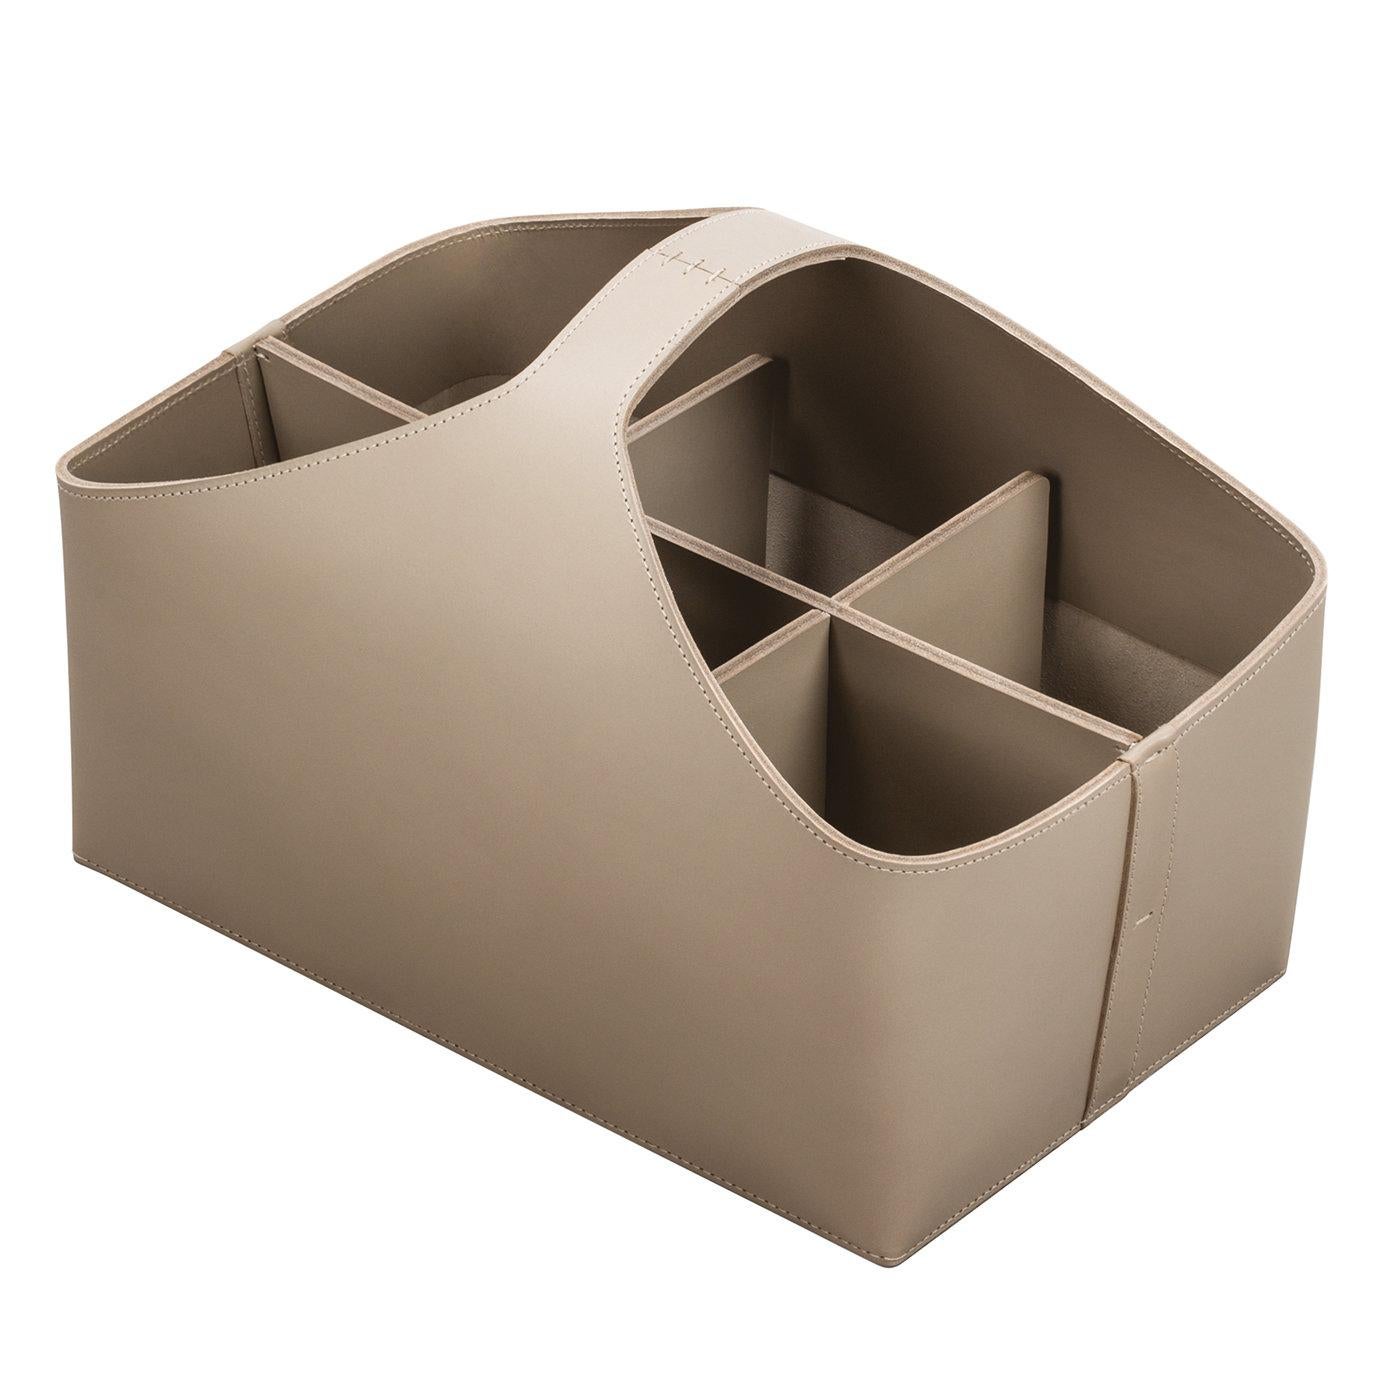 Handcrafted of high-quality leather in a light sand color, and detailed with tone-on-tone stitching, this caddy basket can be displayed anywhere in a modern or traditional decor. From organizing makeup essential to desk or media accessories, this